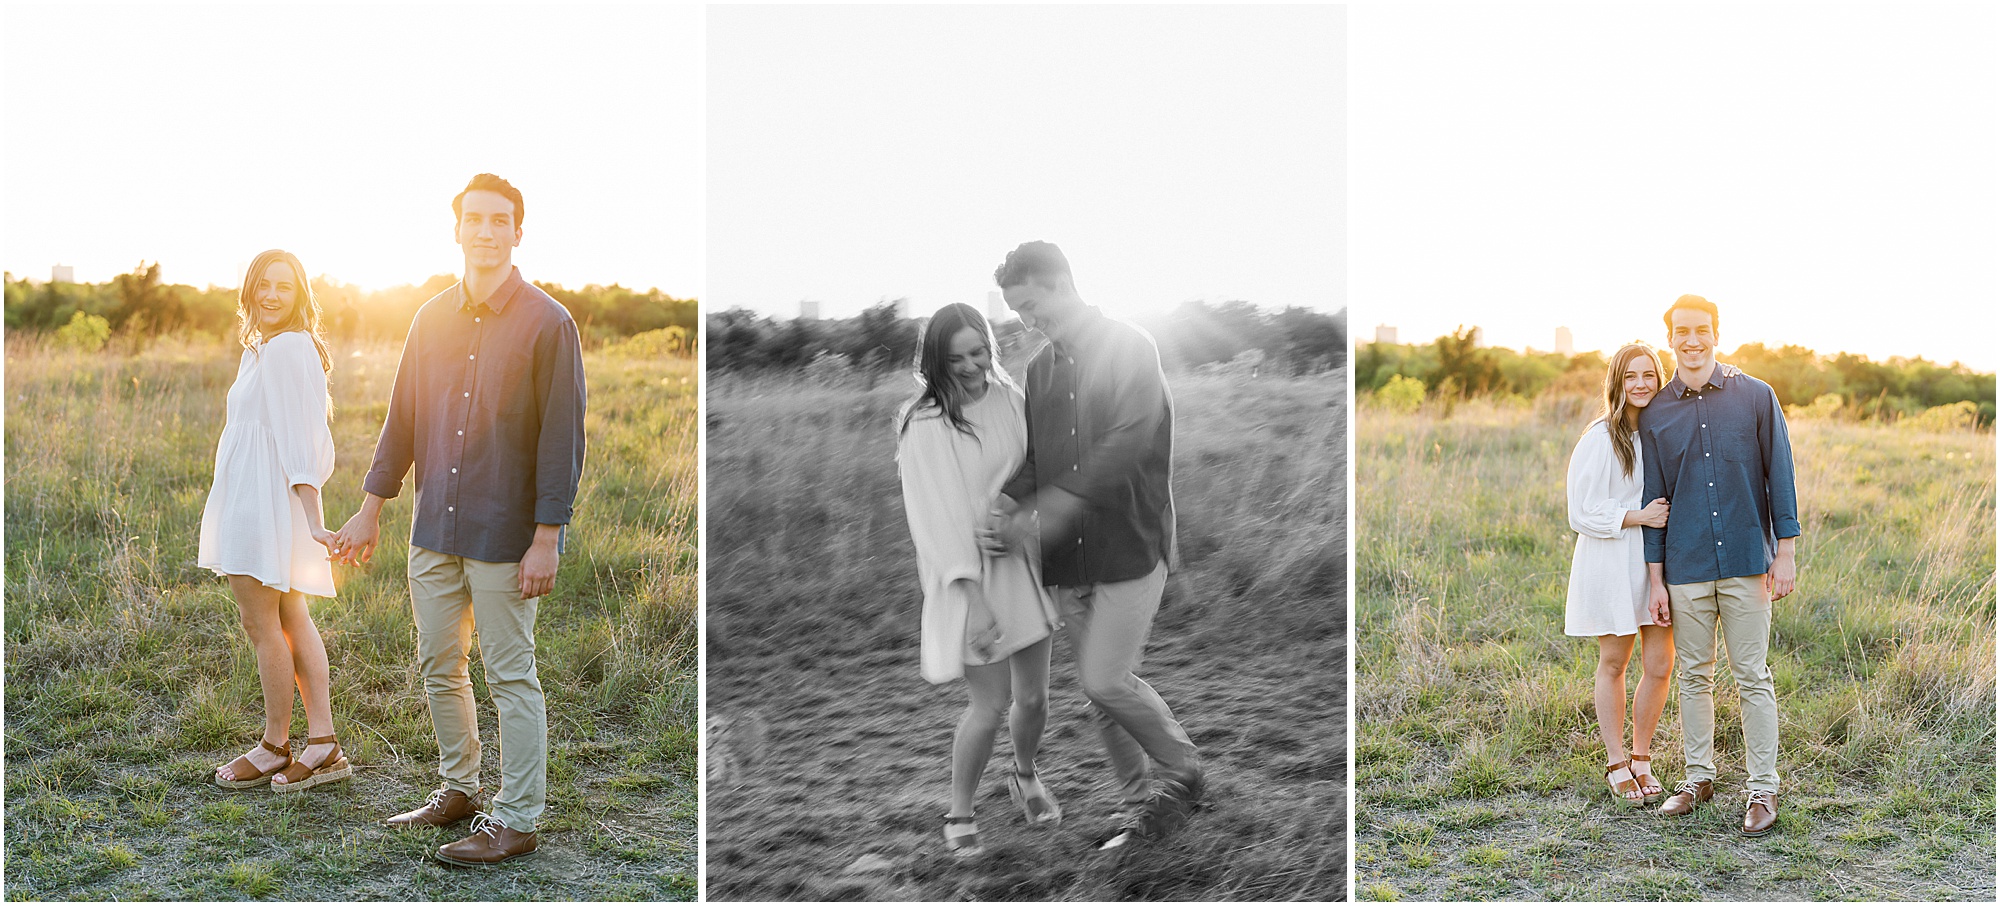 Dallas, Texas Engagement Session | Blue Hour Engagement Photos | Outdoor Engagement Session | Texas Wedding Photographer | Bailee Starr Photography